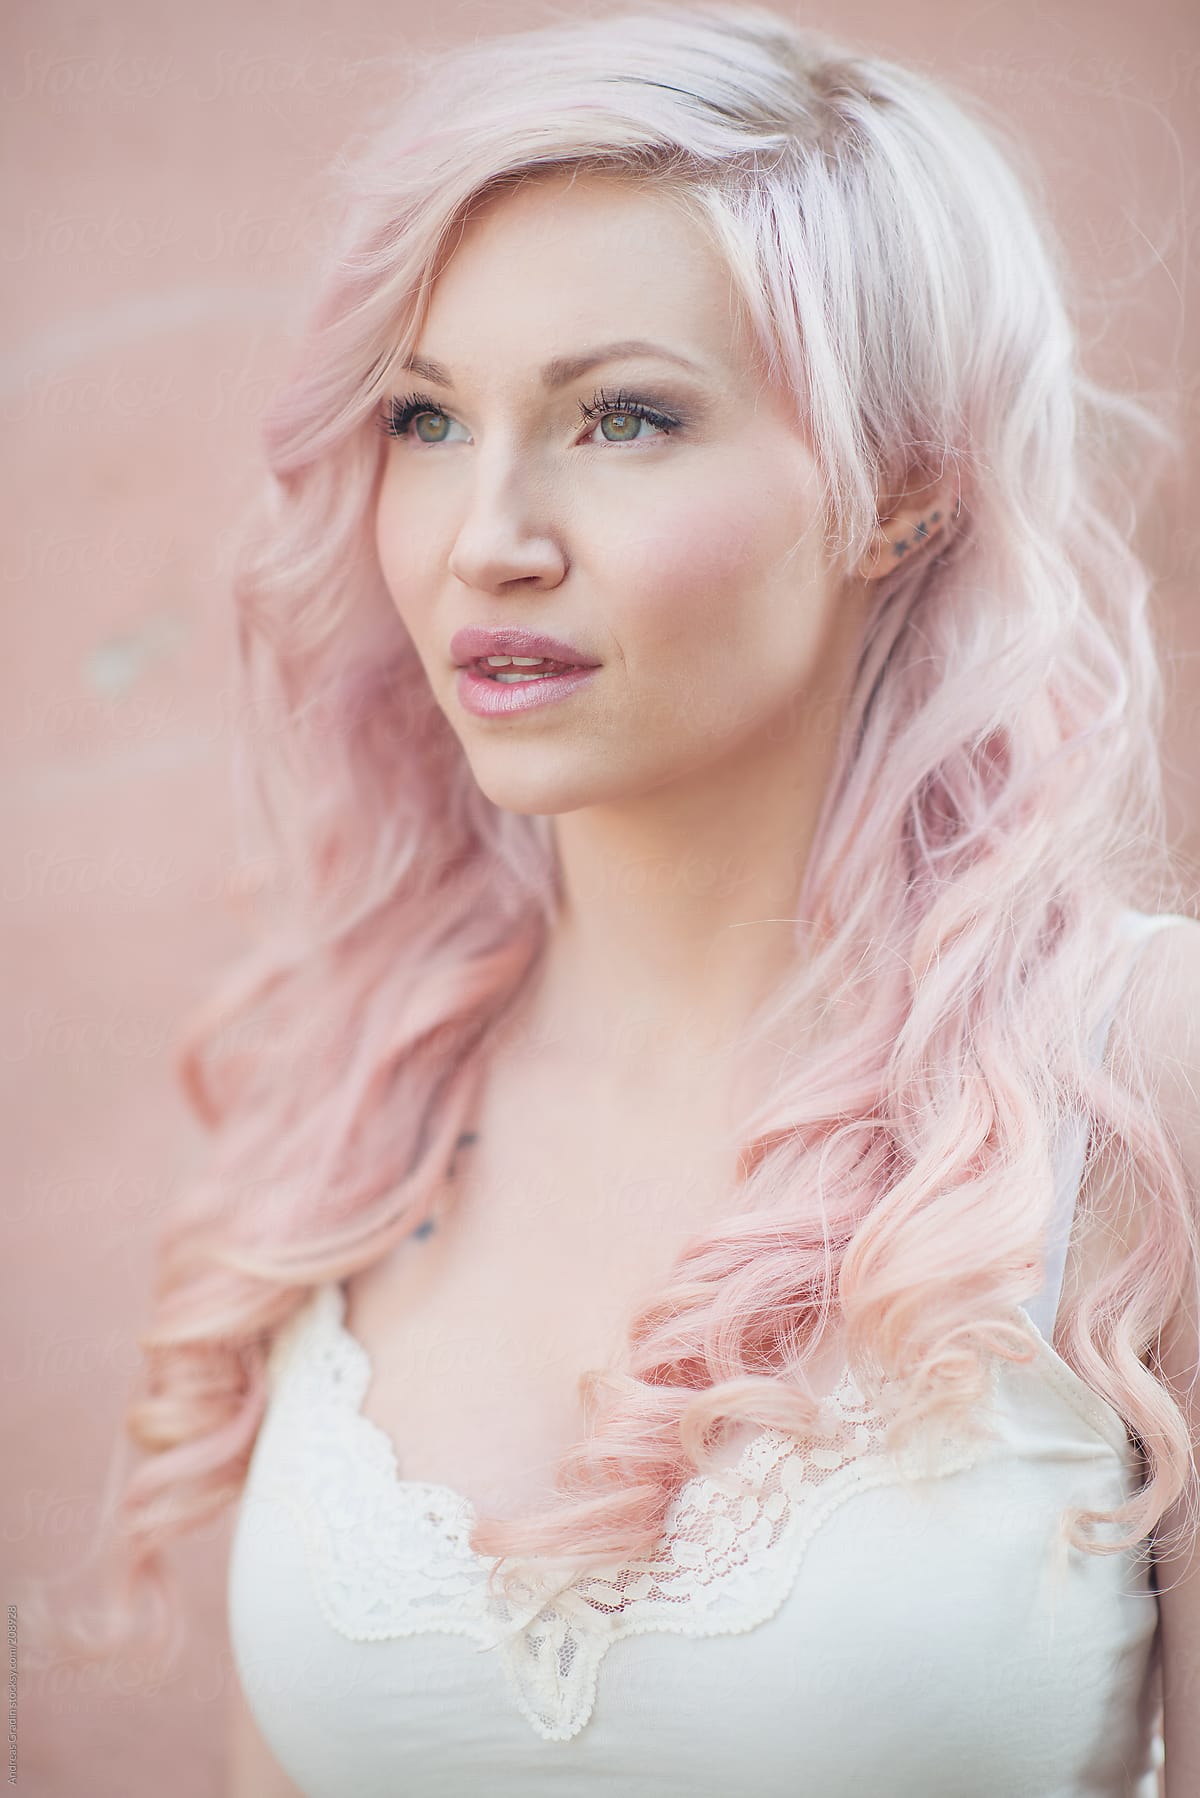 Girl With Pastel Pink And Blonde Hair By Stocksy Contributor Andreas Gradin Stocksy